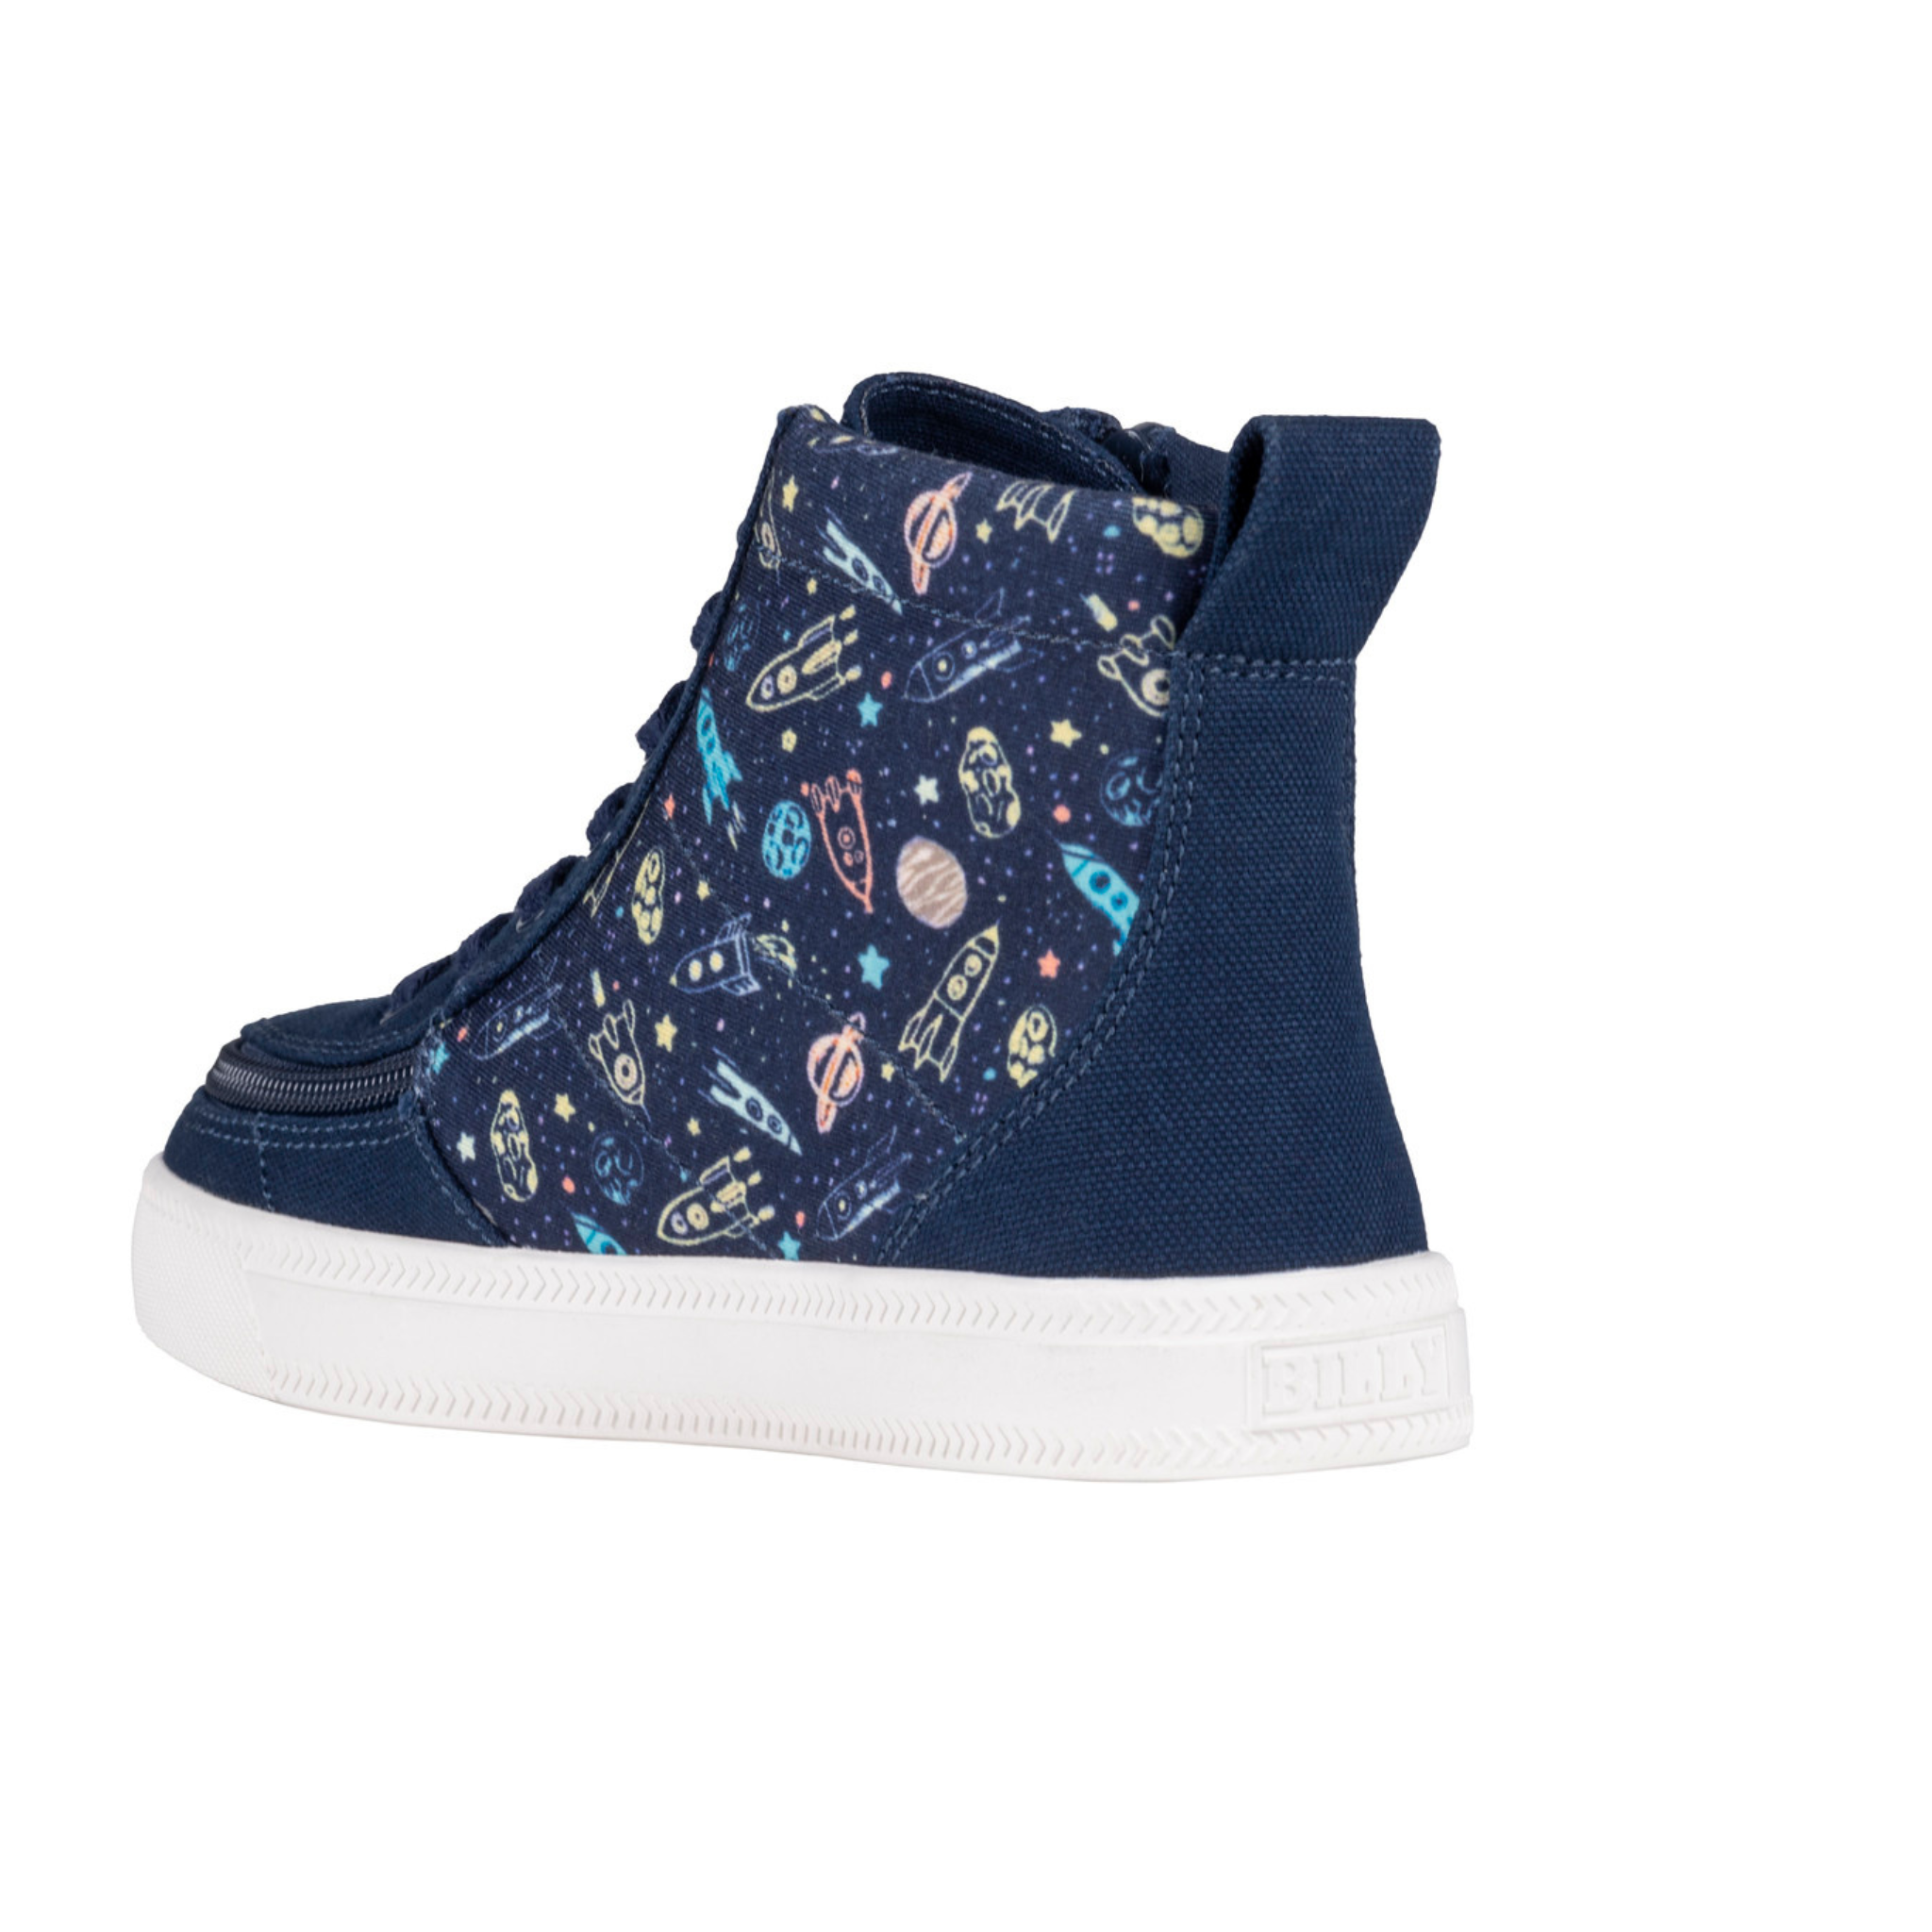 Billy Footwear (Kids) - High Top Space Canvas Shoes